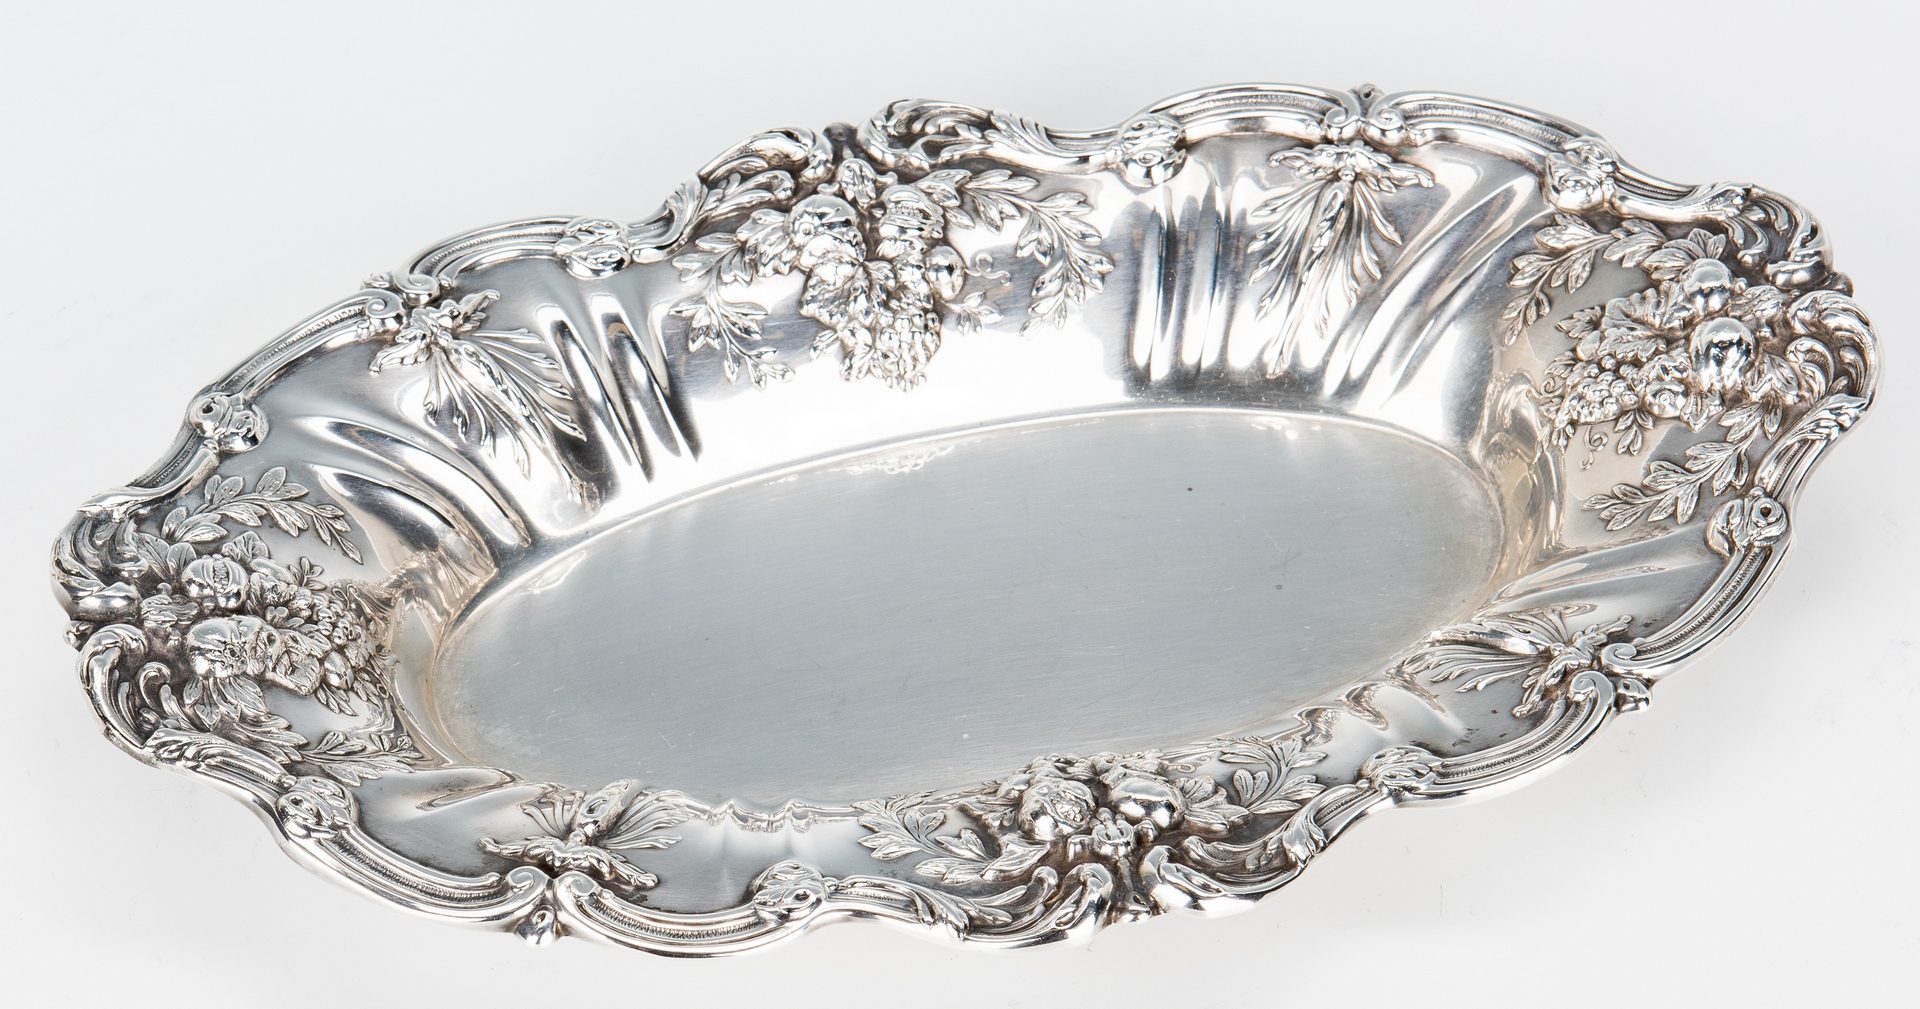 Lot 34: Francis 1 Sterling Bowl & Bread Tray, 2 items